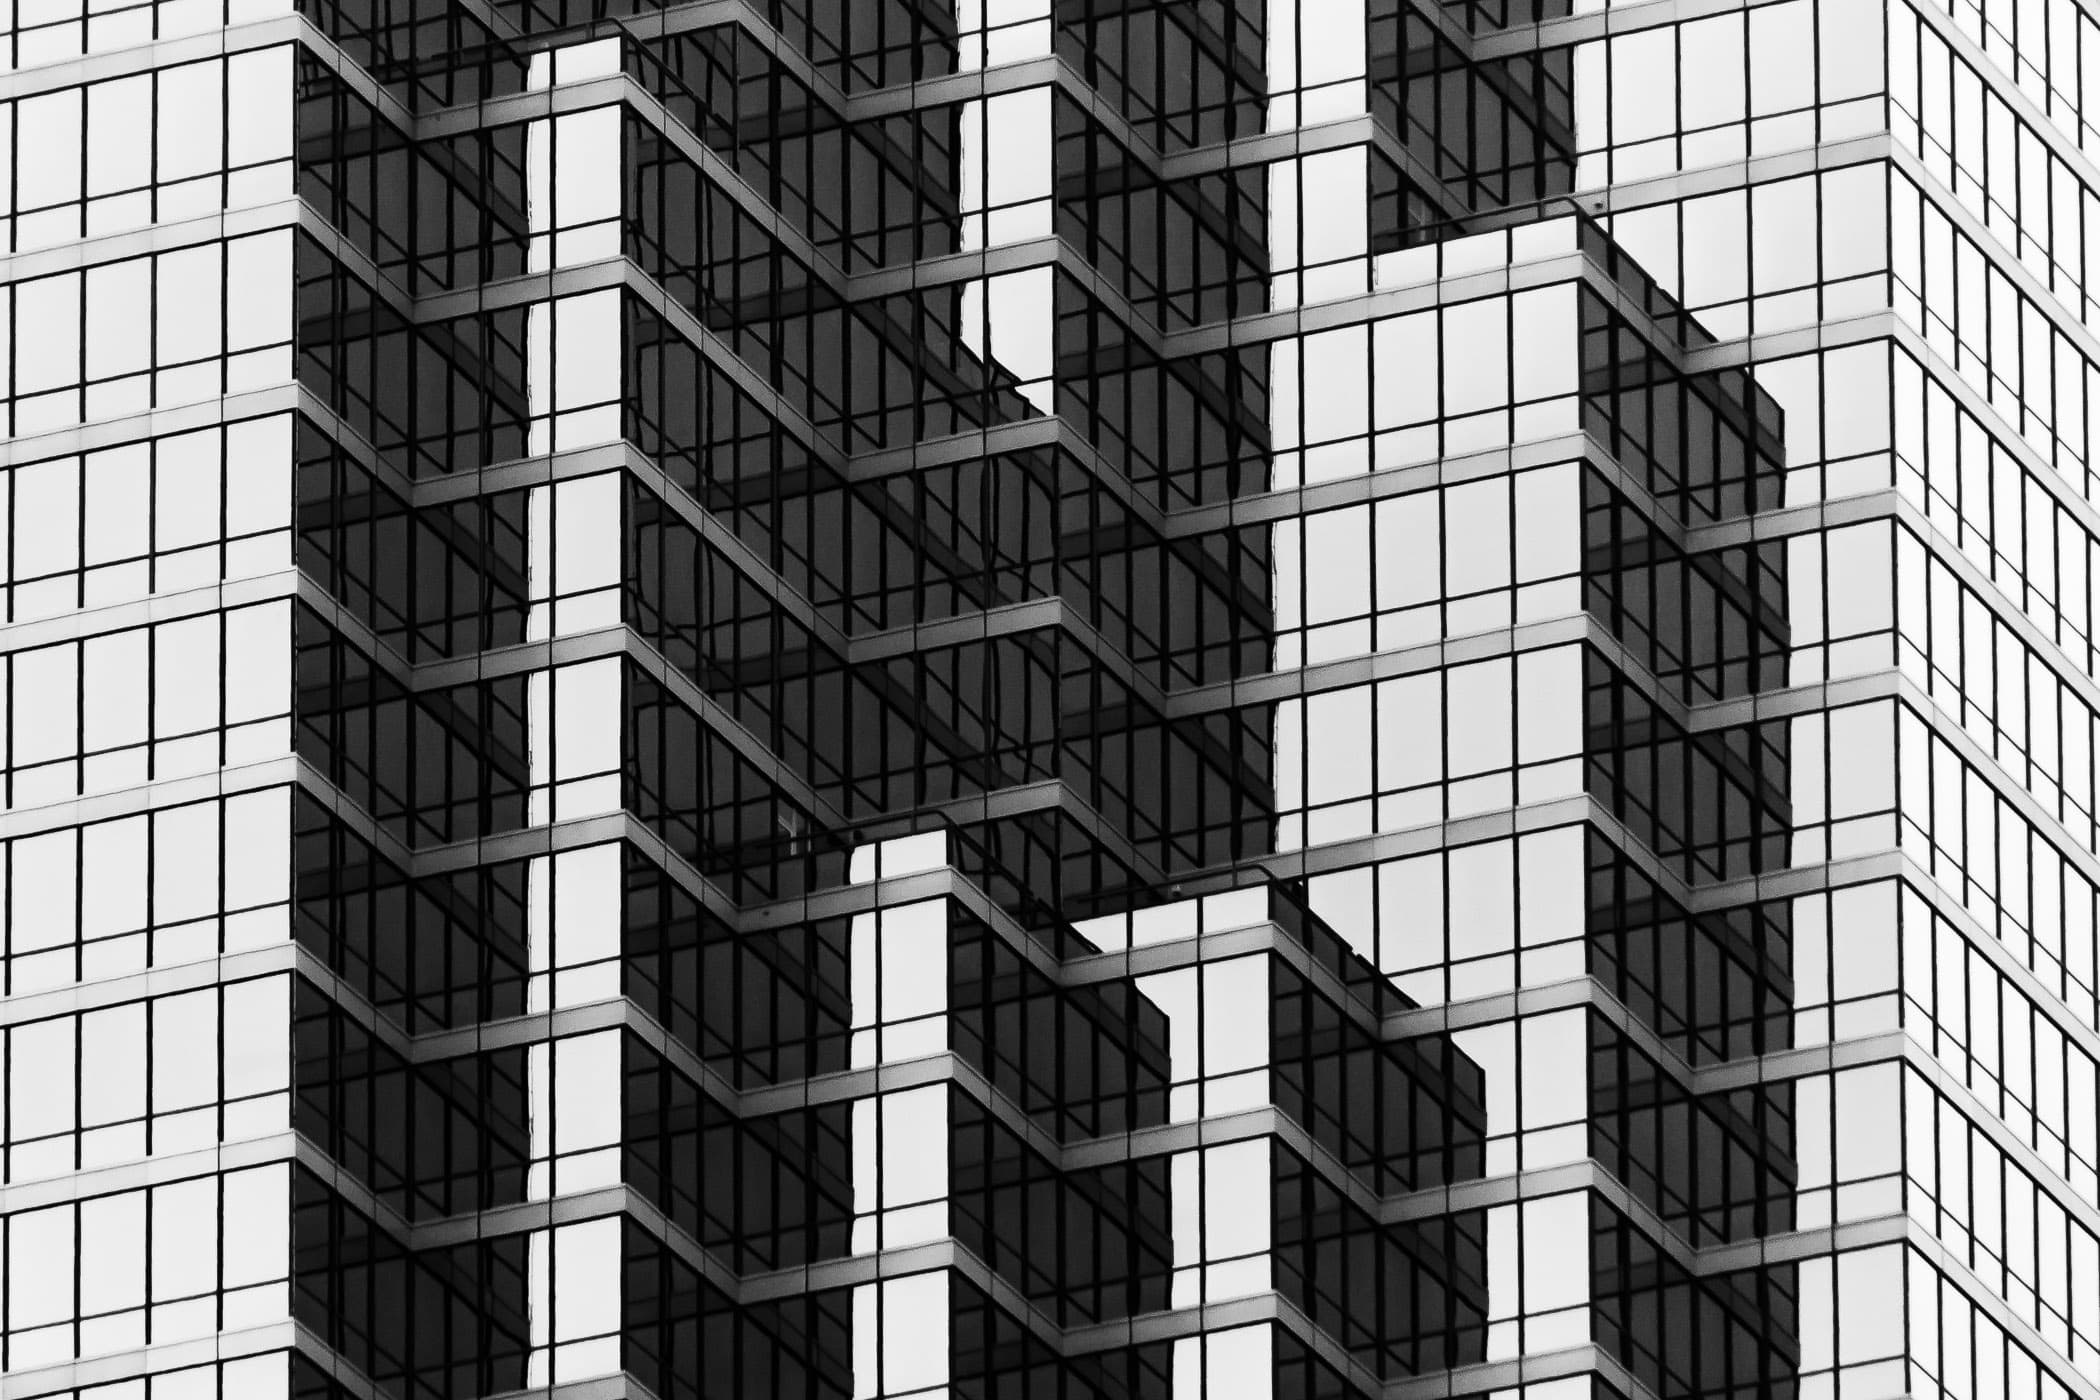 Architectural detail of Dallas' tallest building, the Bank of America Plaza.